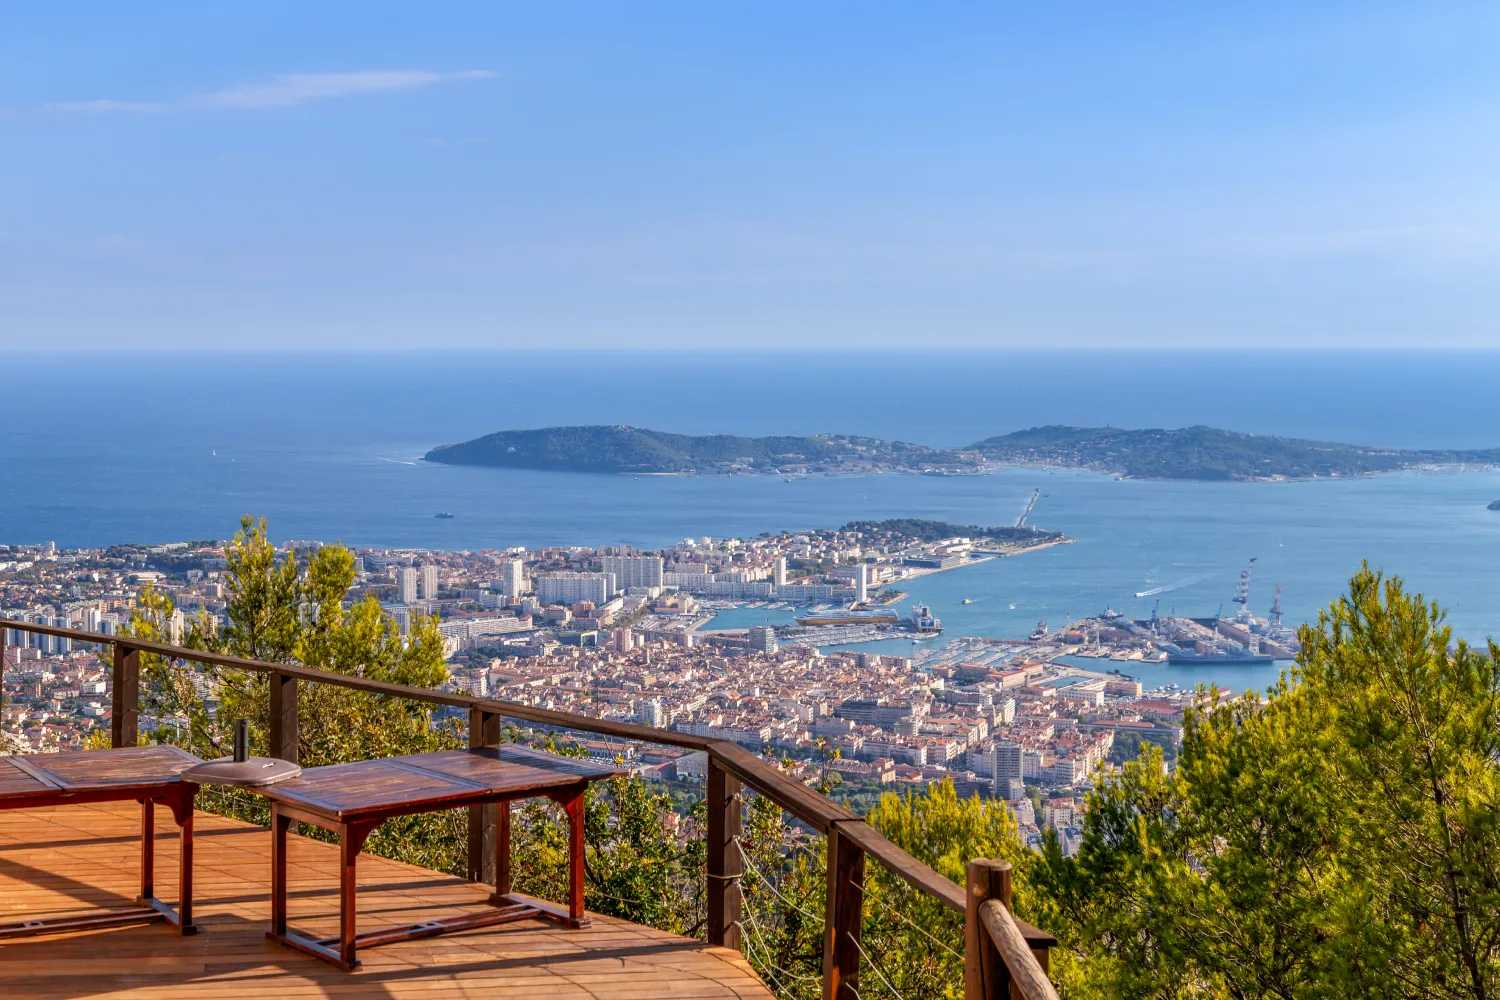 Aerial View Of Toulon City And Coastline From Observation Deck On The Faron Mountain